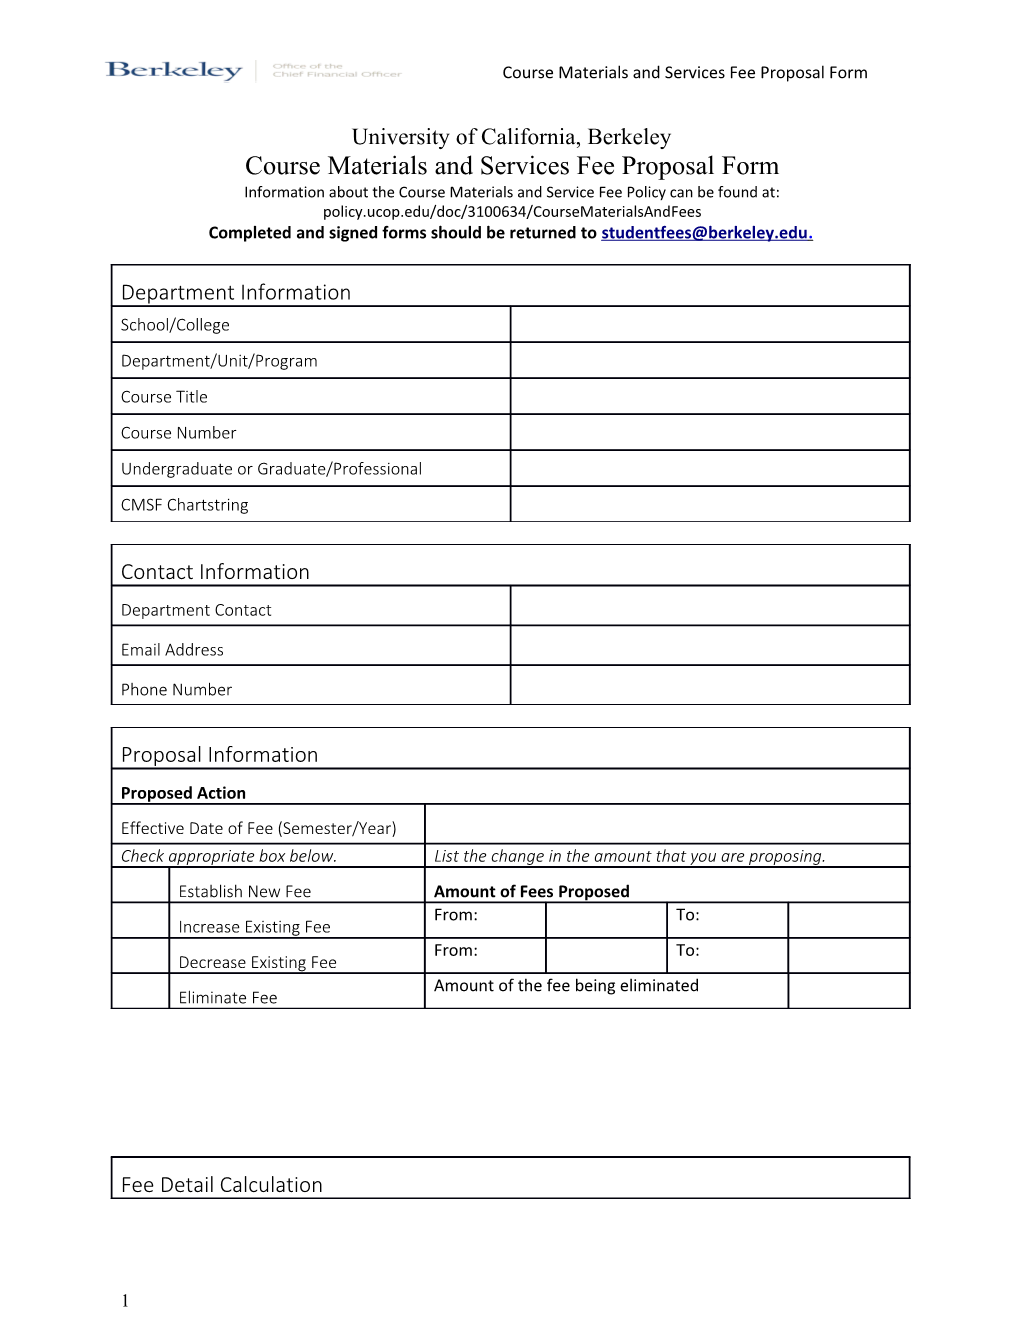 Course Materials and Services Fee Proposal Form